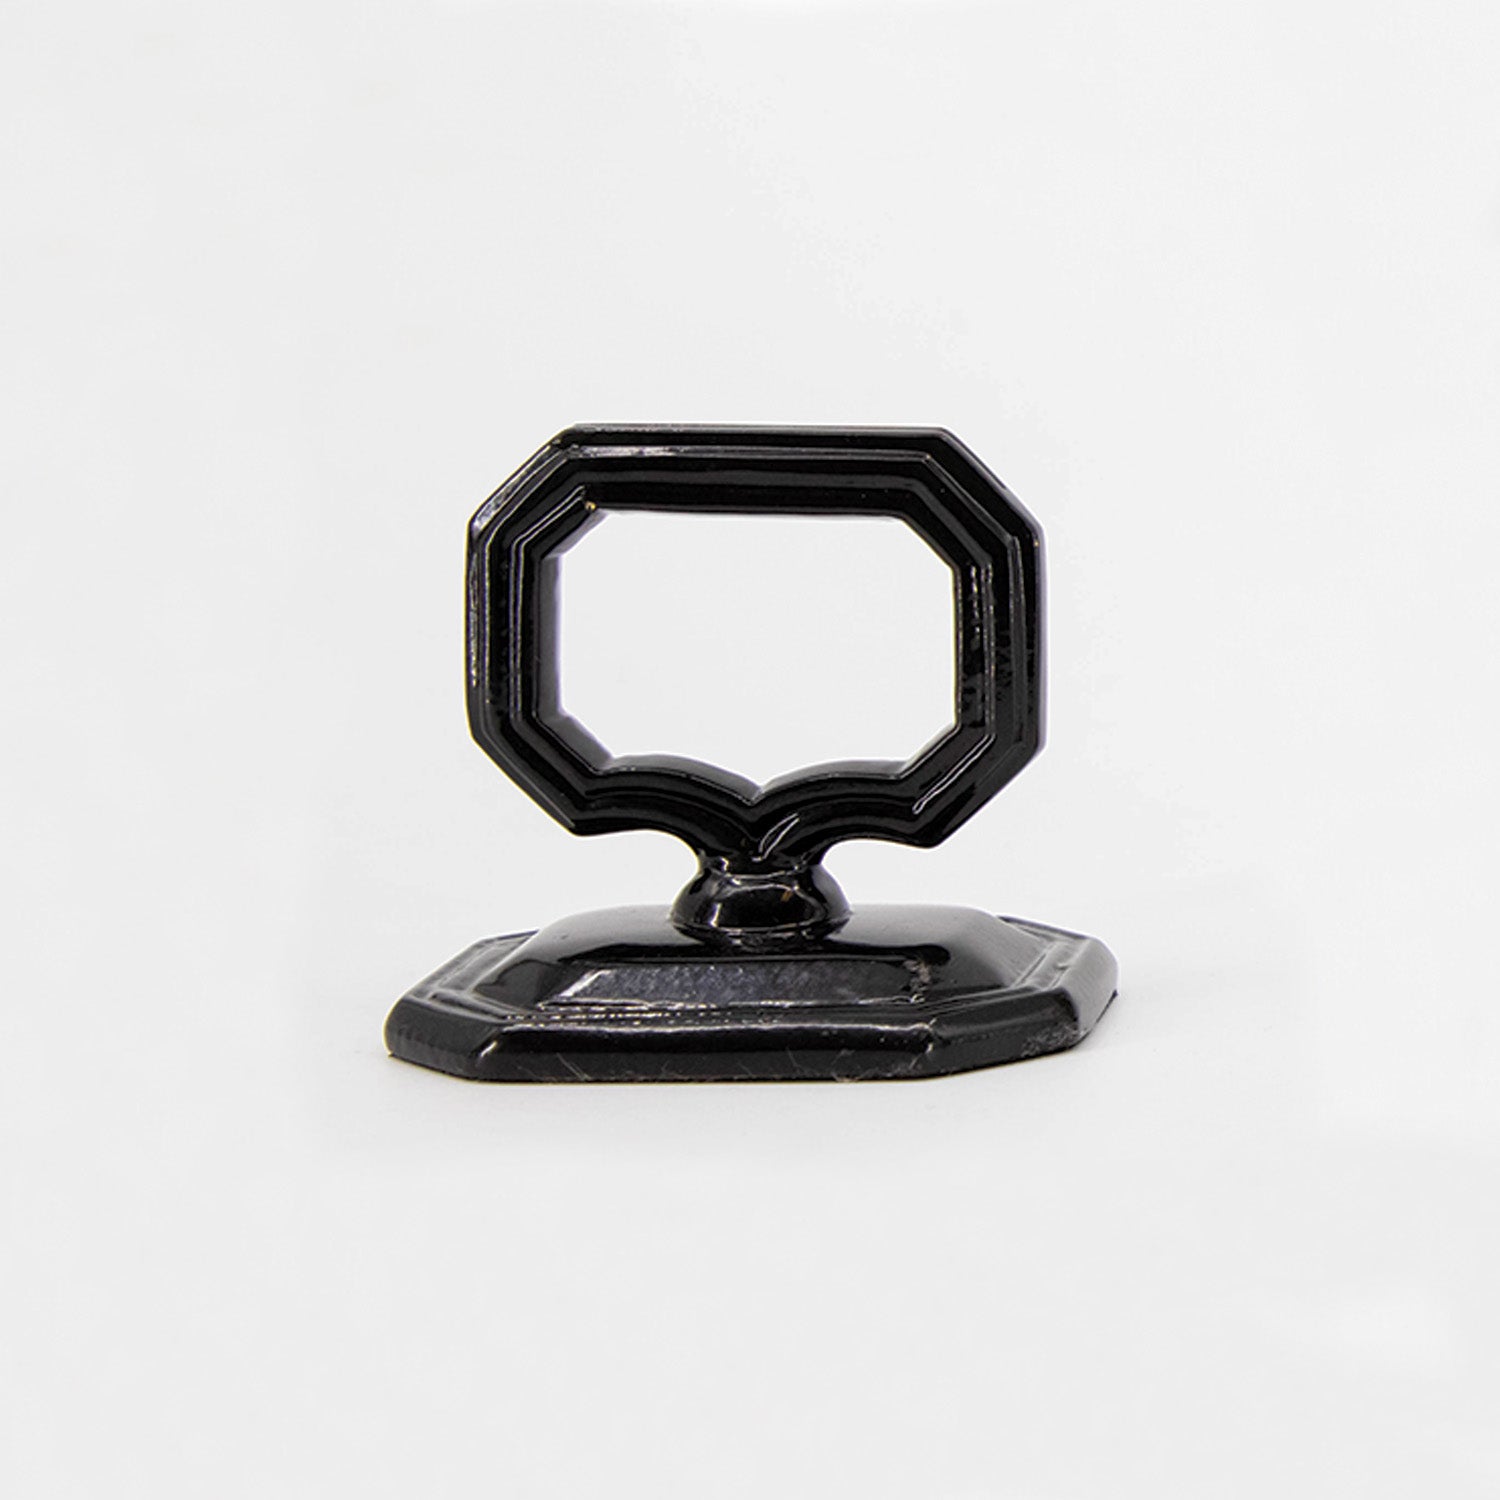 A black vintage-style Napkin Ring with Place Card Holder on a white background.